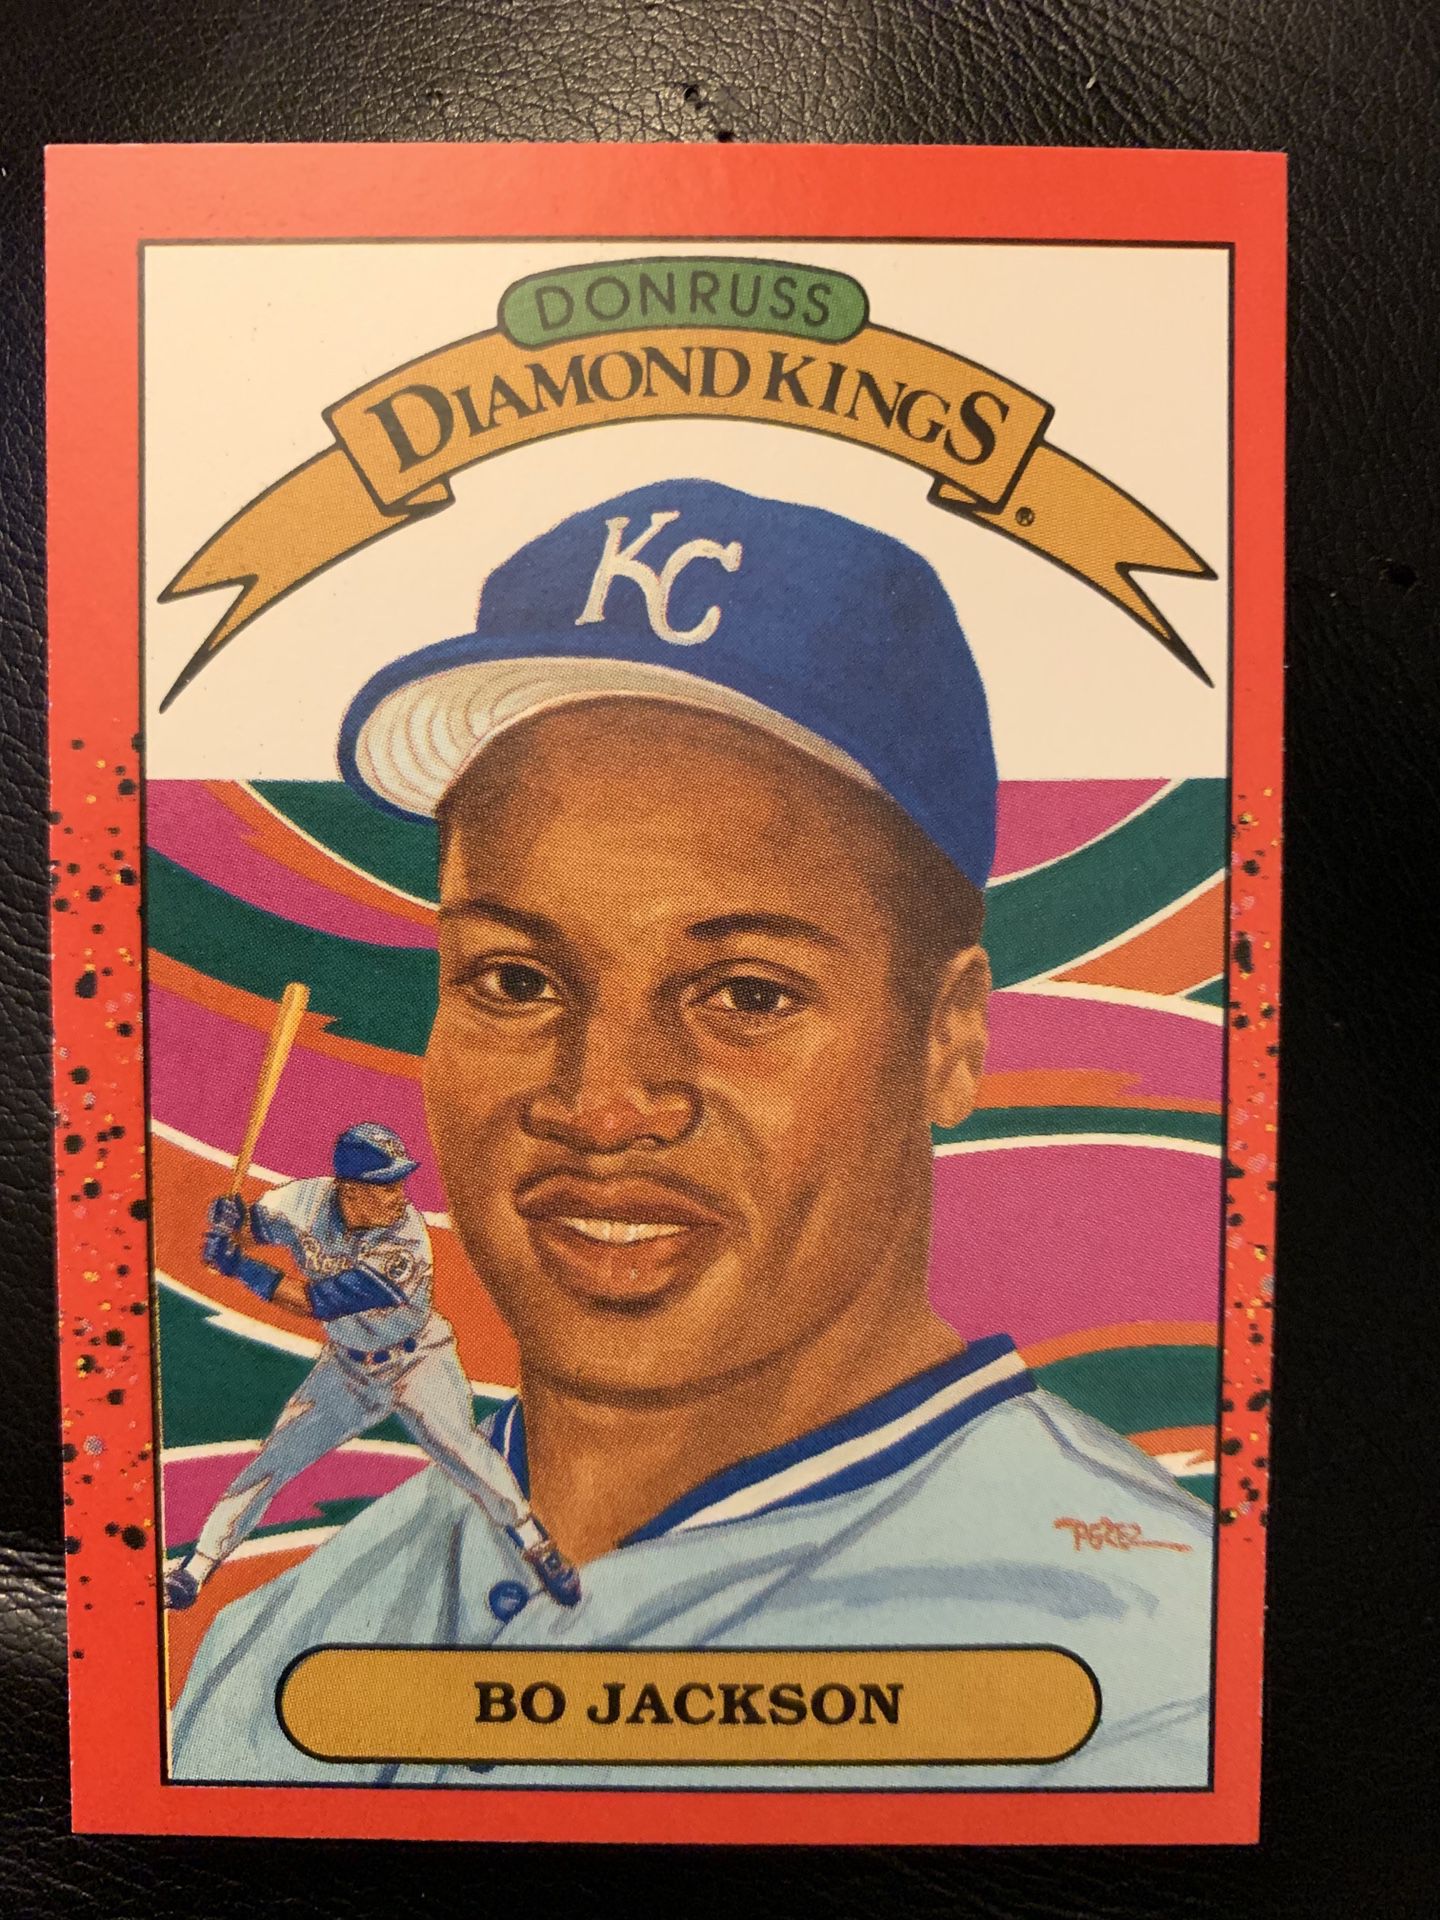 Bo Jackson Baseball Card for Sale in Campbell, CA - OfferUp